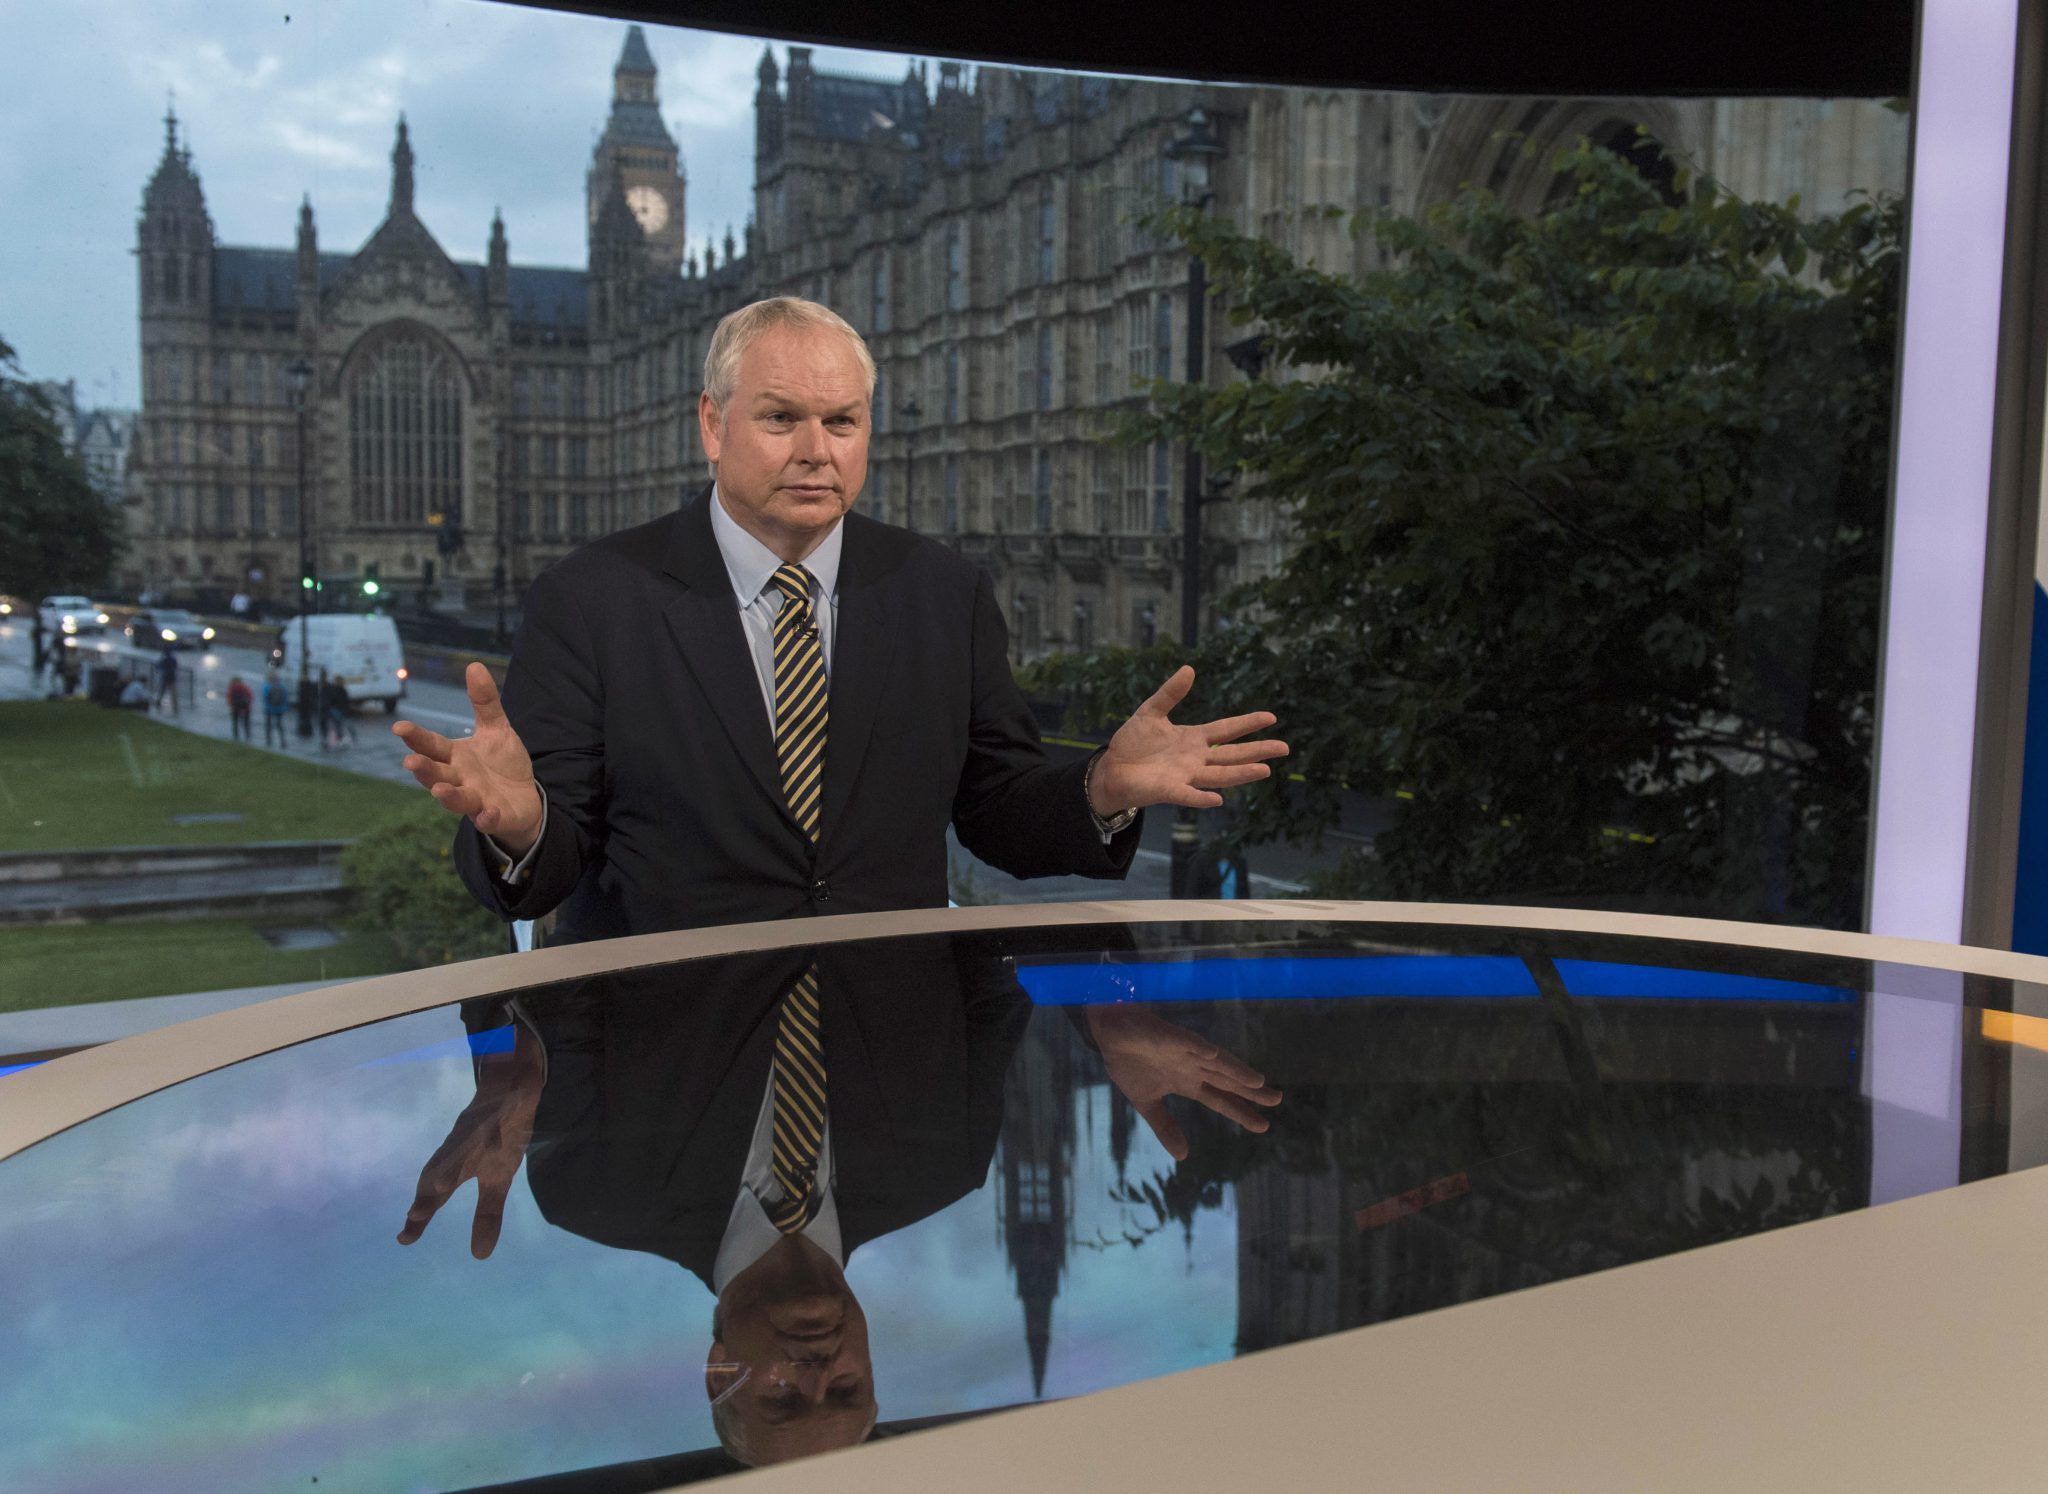 In this handout image provided by Sky News, Adam Boulton prepares to deliver the referendum results on June 23, 2016 in London, England. (Photo by Chris Lobina/Sky News via Getty Images)